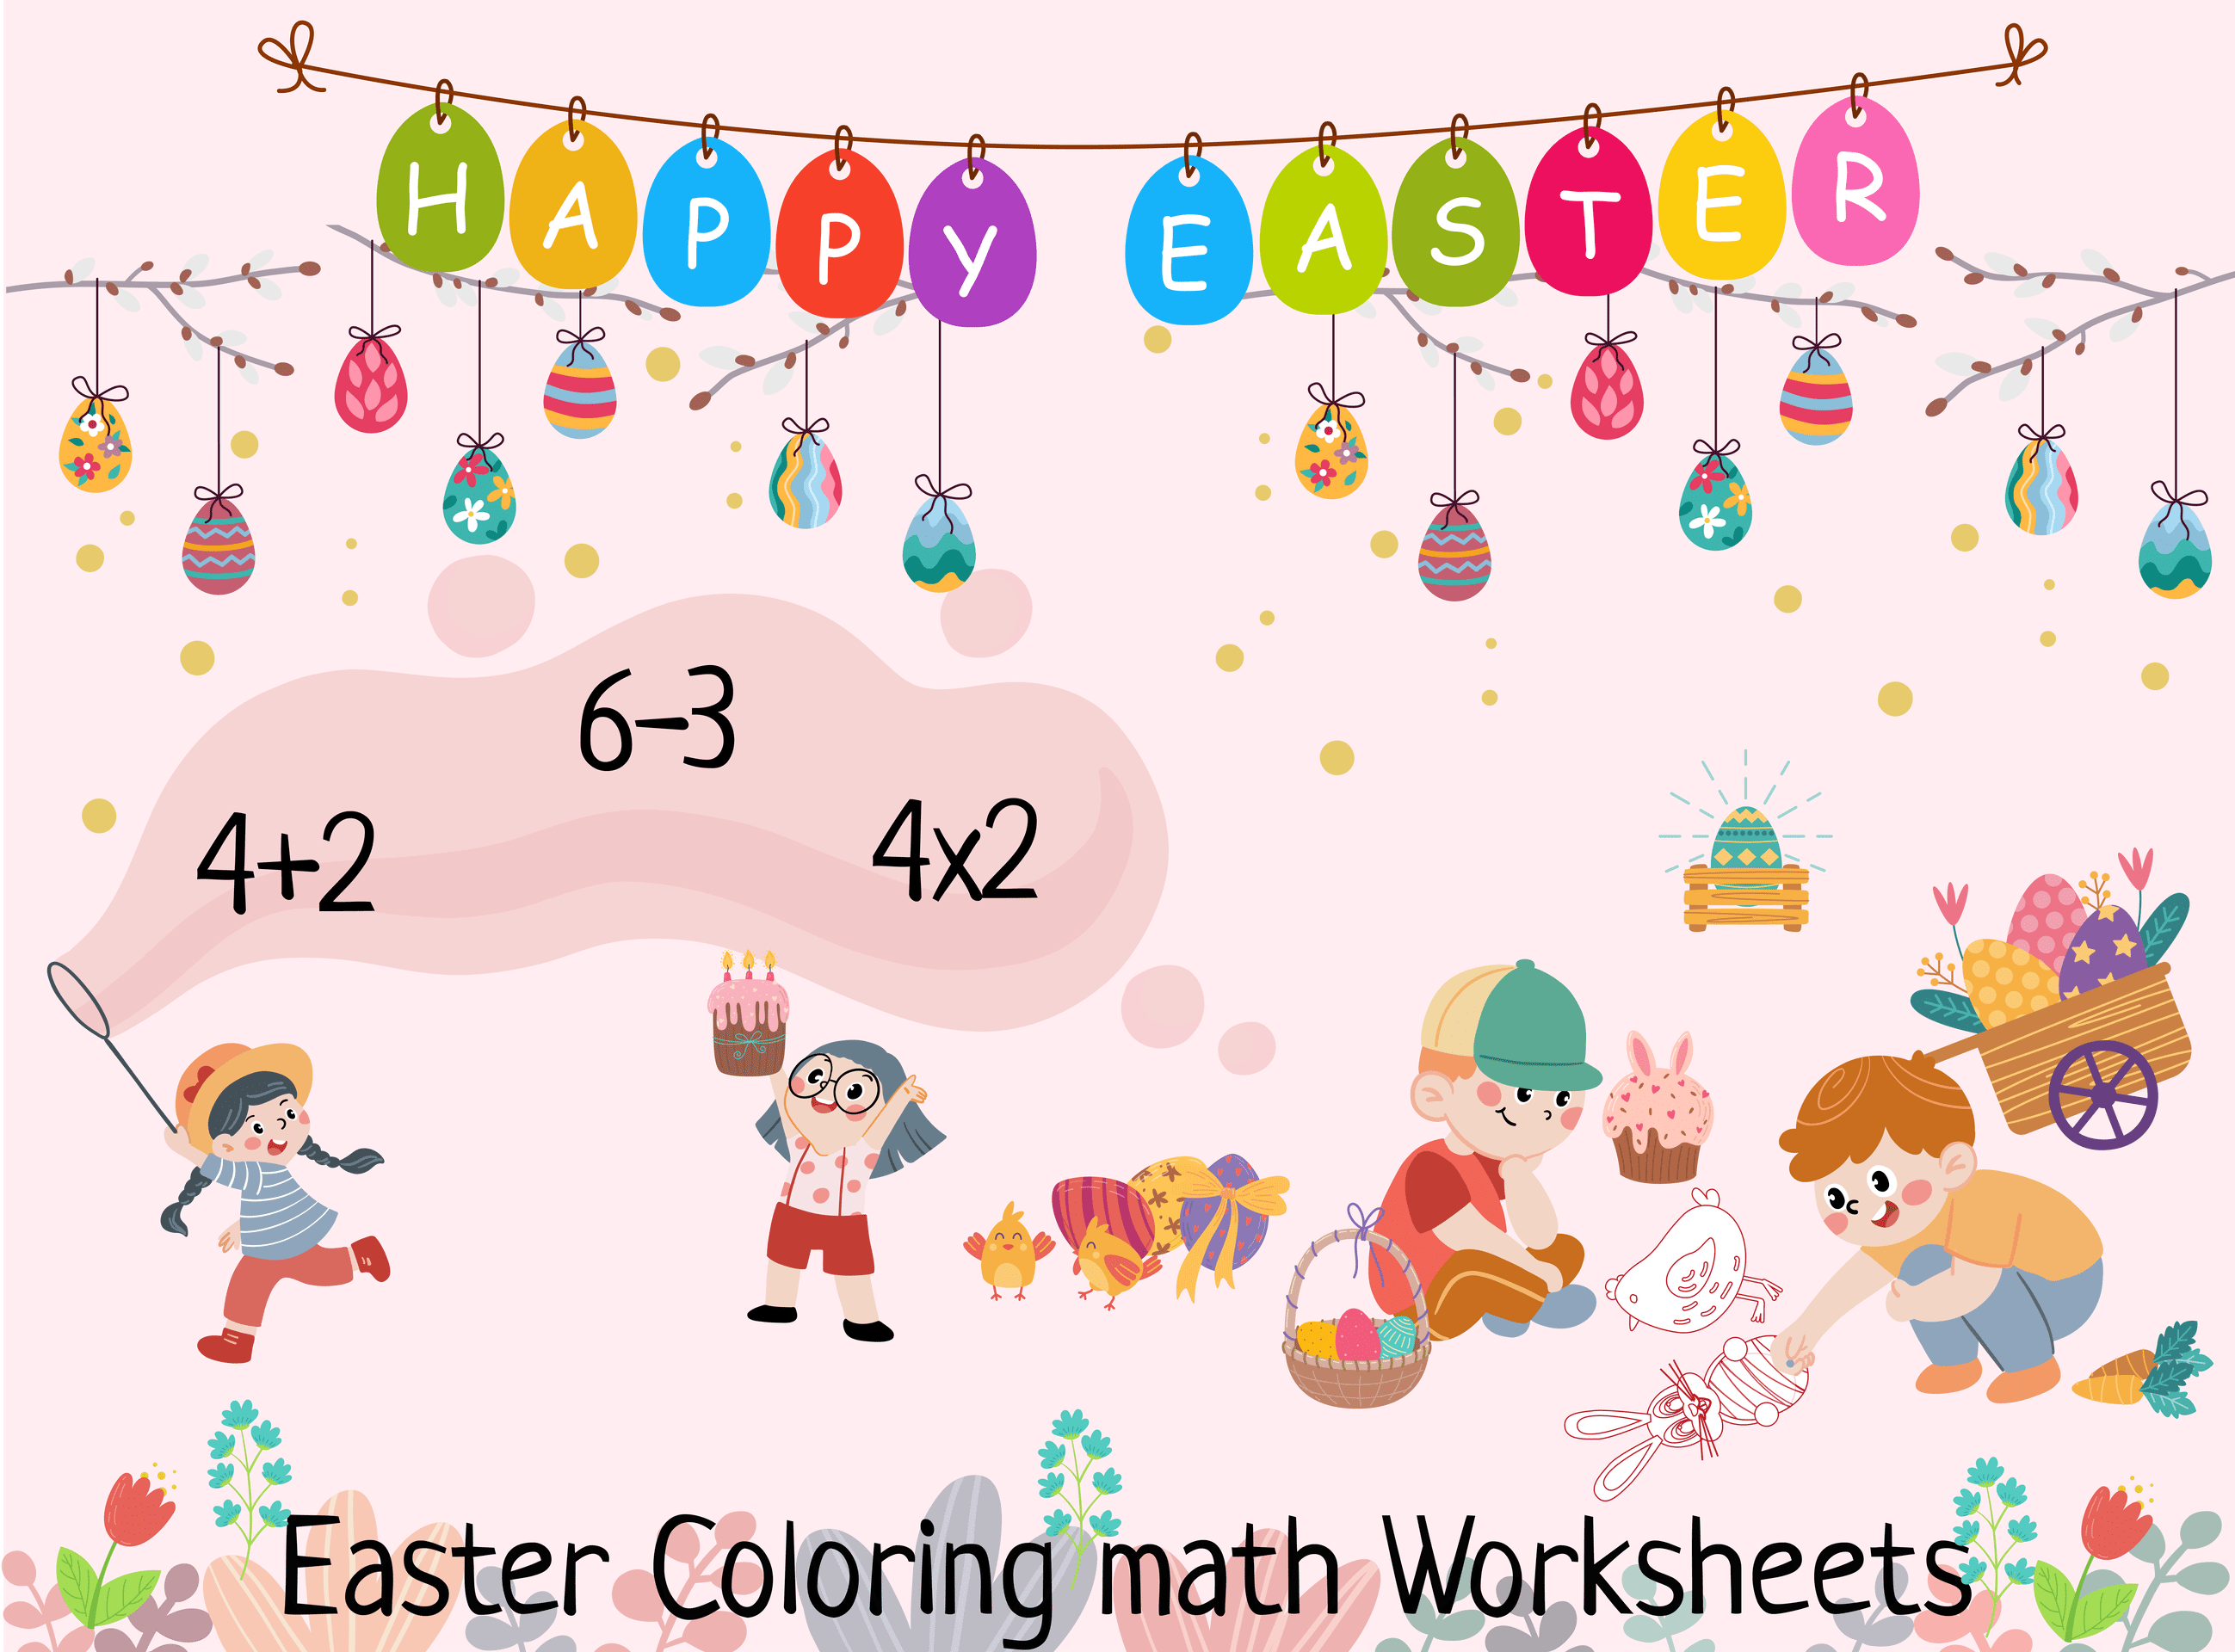 Easter festival arranging by kiddos with coloring activity